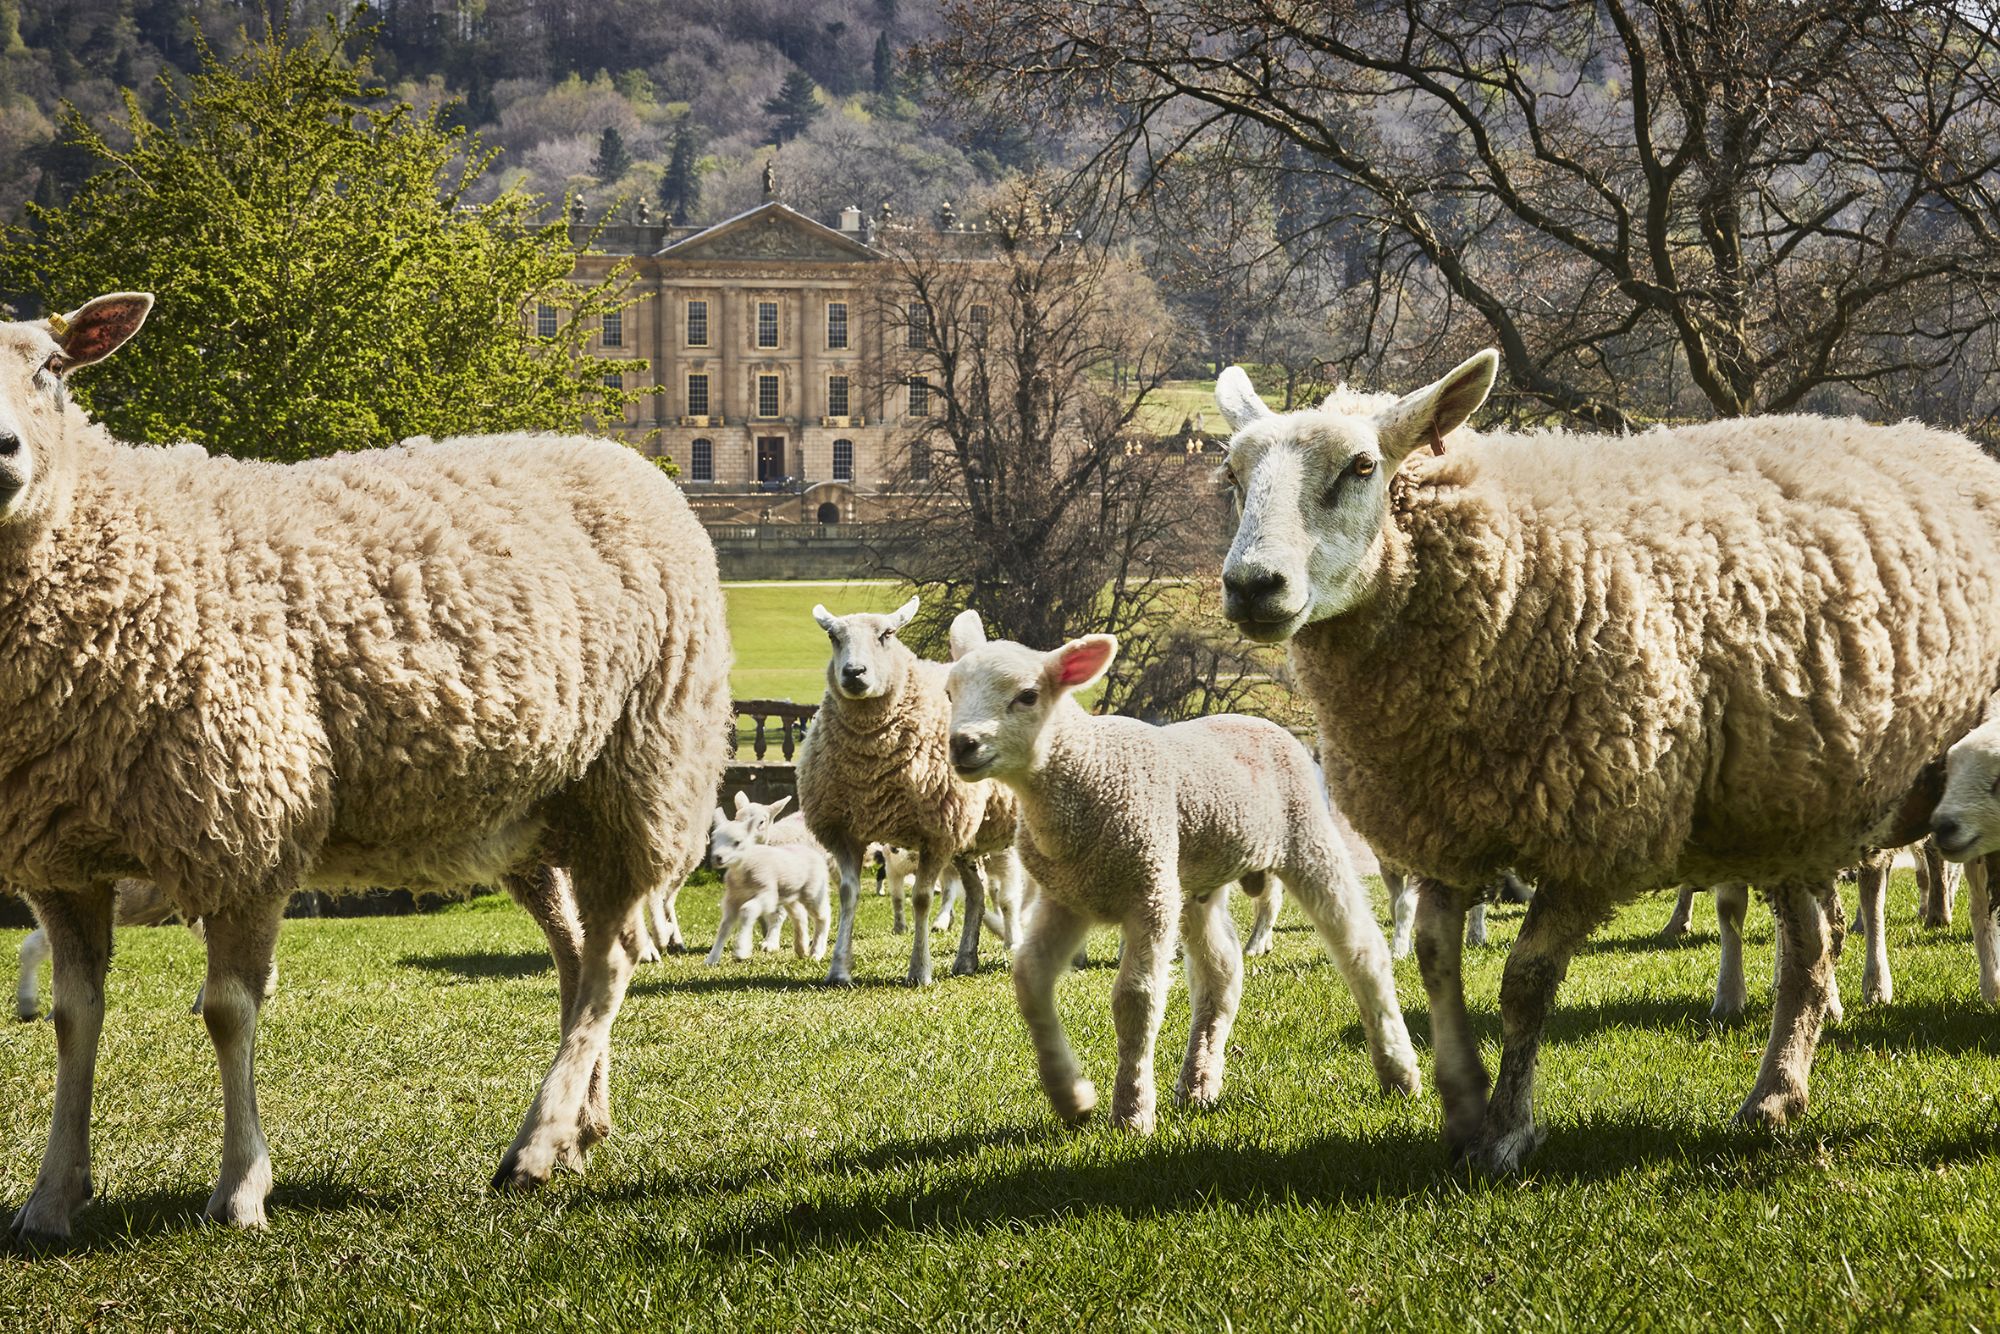 Sheep and lambs with Chatsworth house in the background